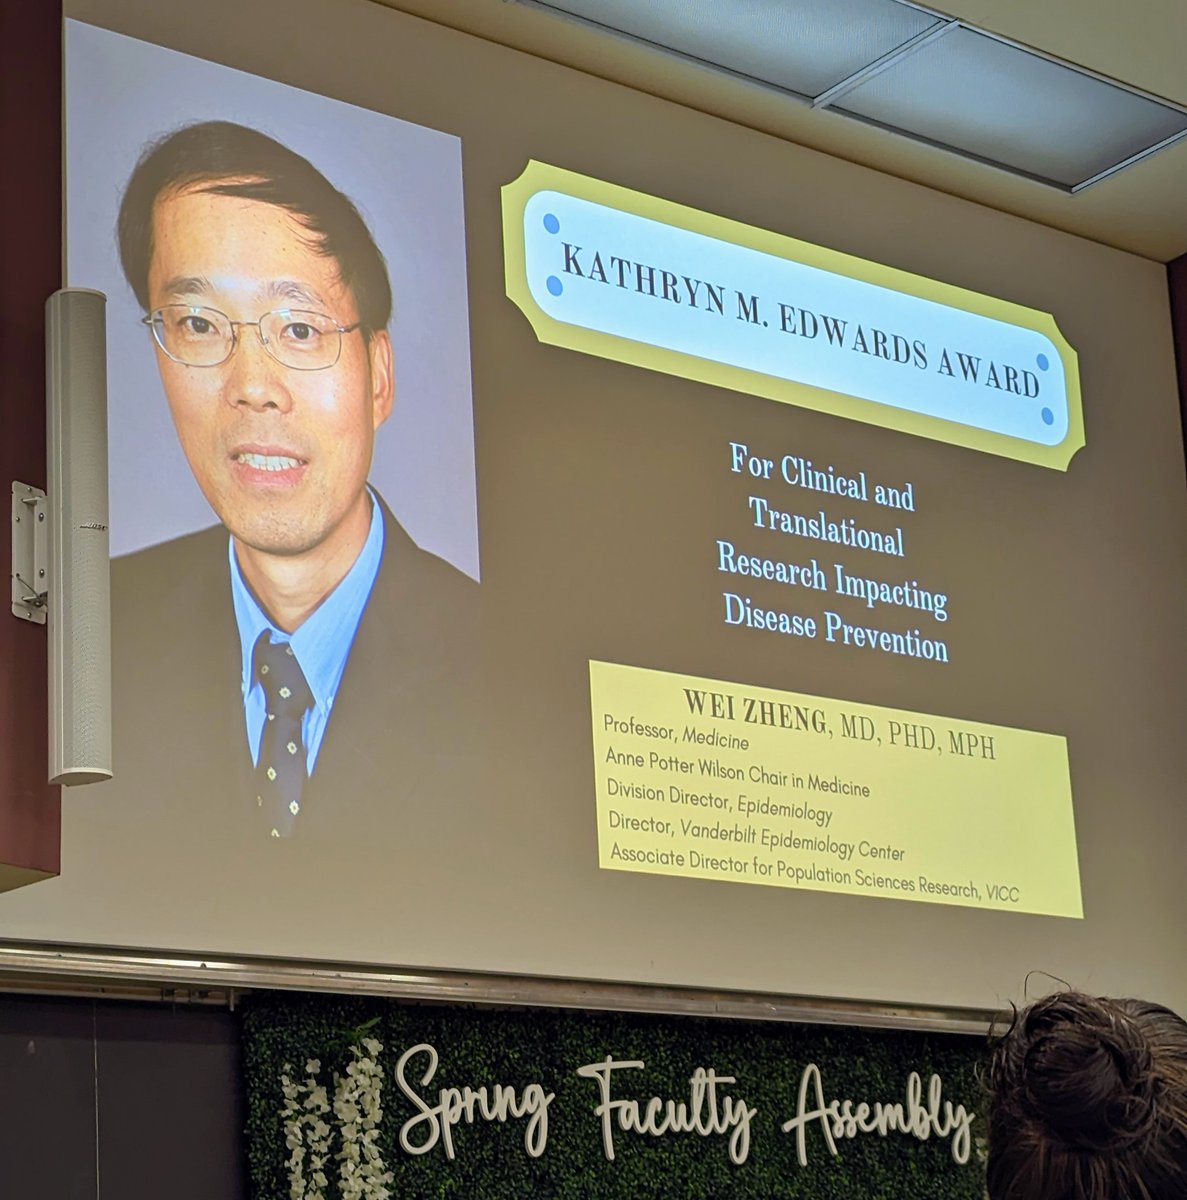 Congrats to Bill & Wei, @vuglobalhealth faculty, for receiving prestigious @VUmedicine faculty awards! They are true role models in clinical care and research! It's wonderful working with you